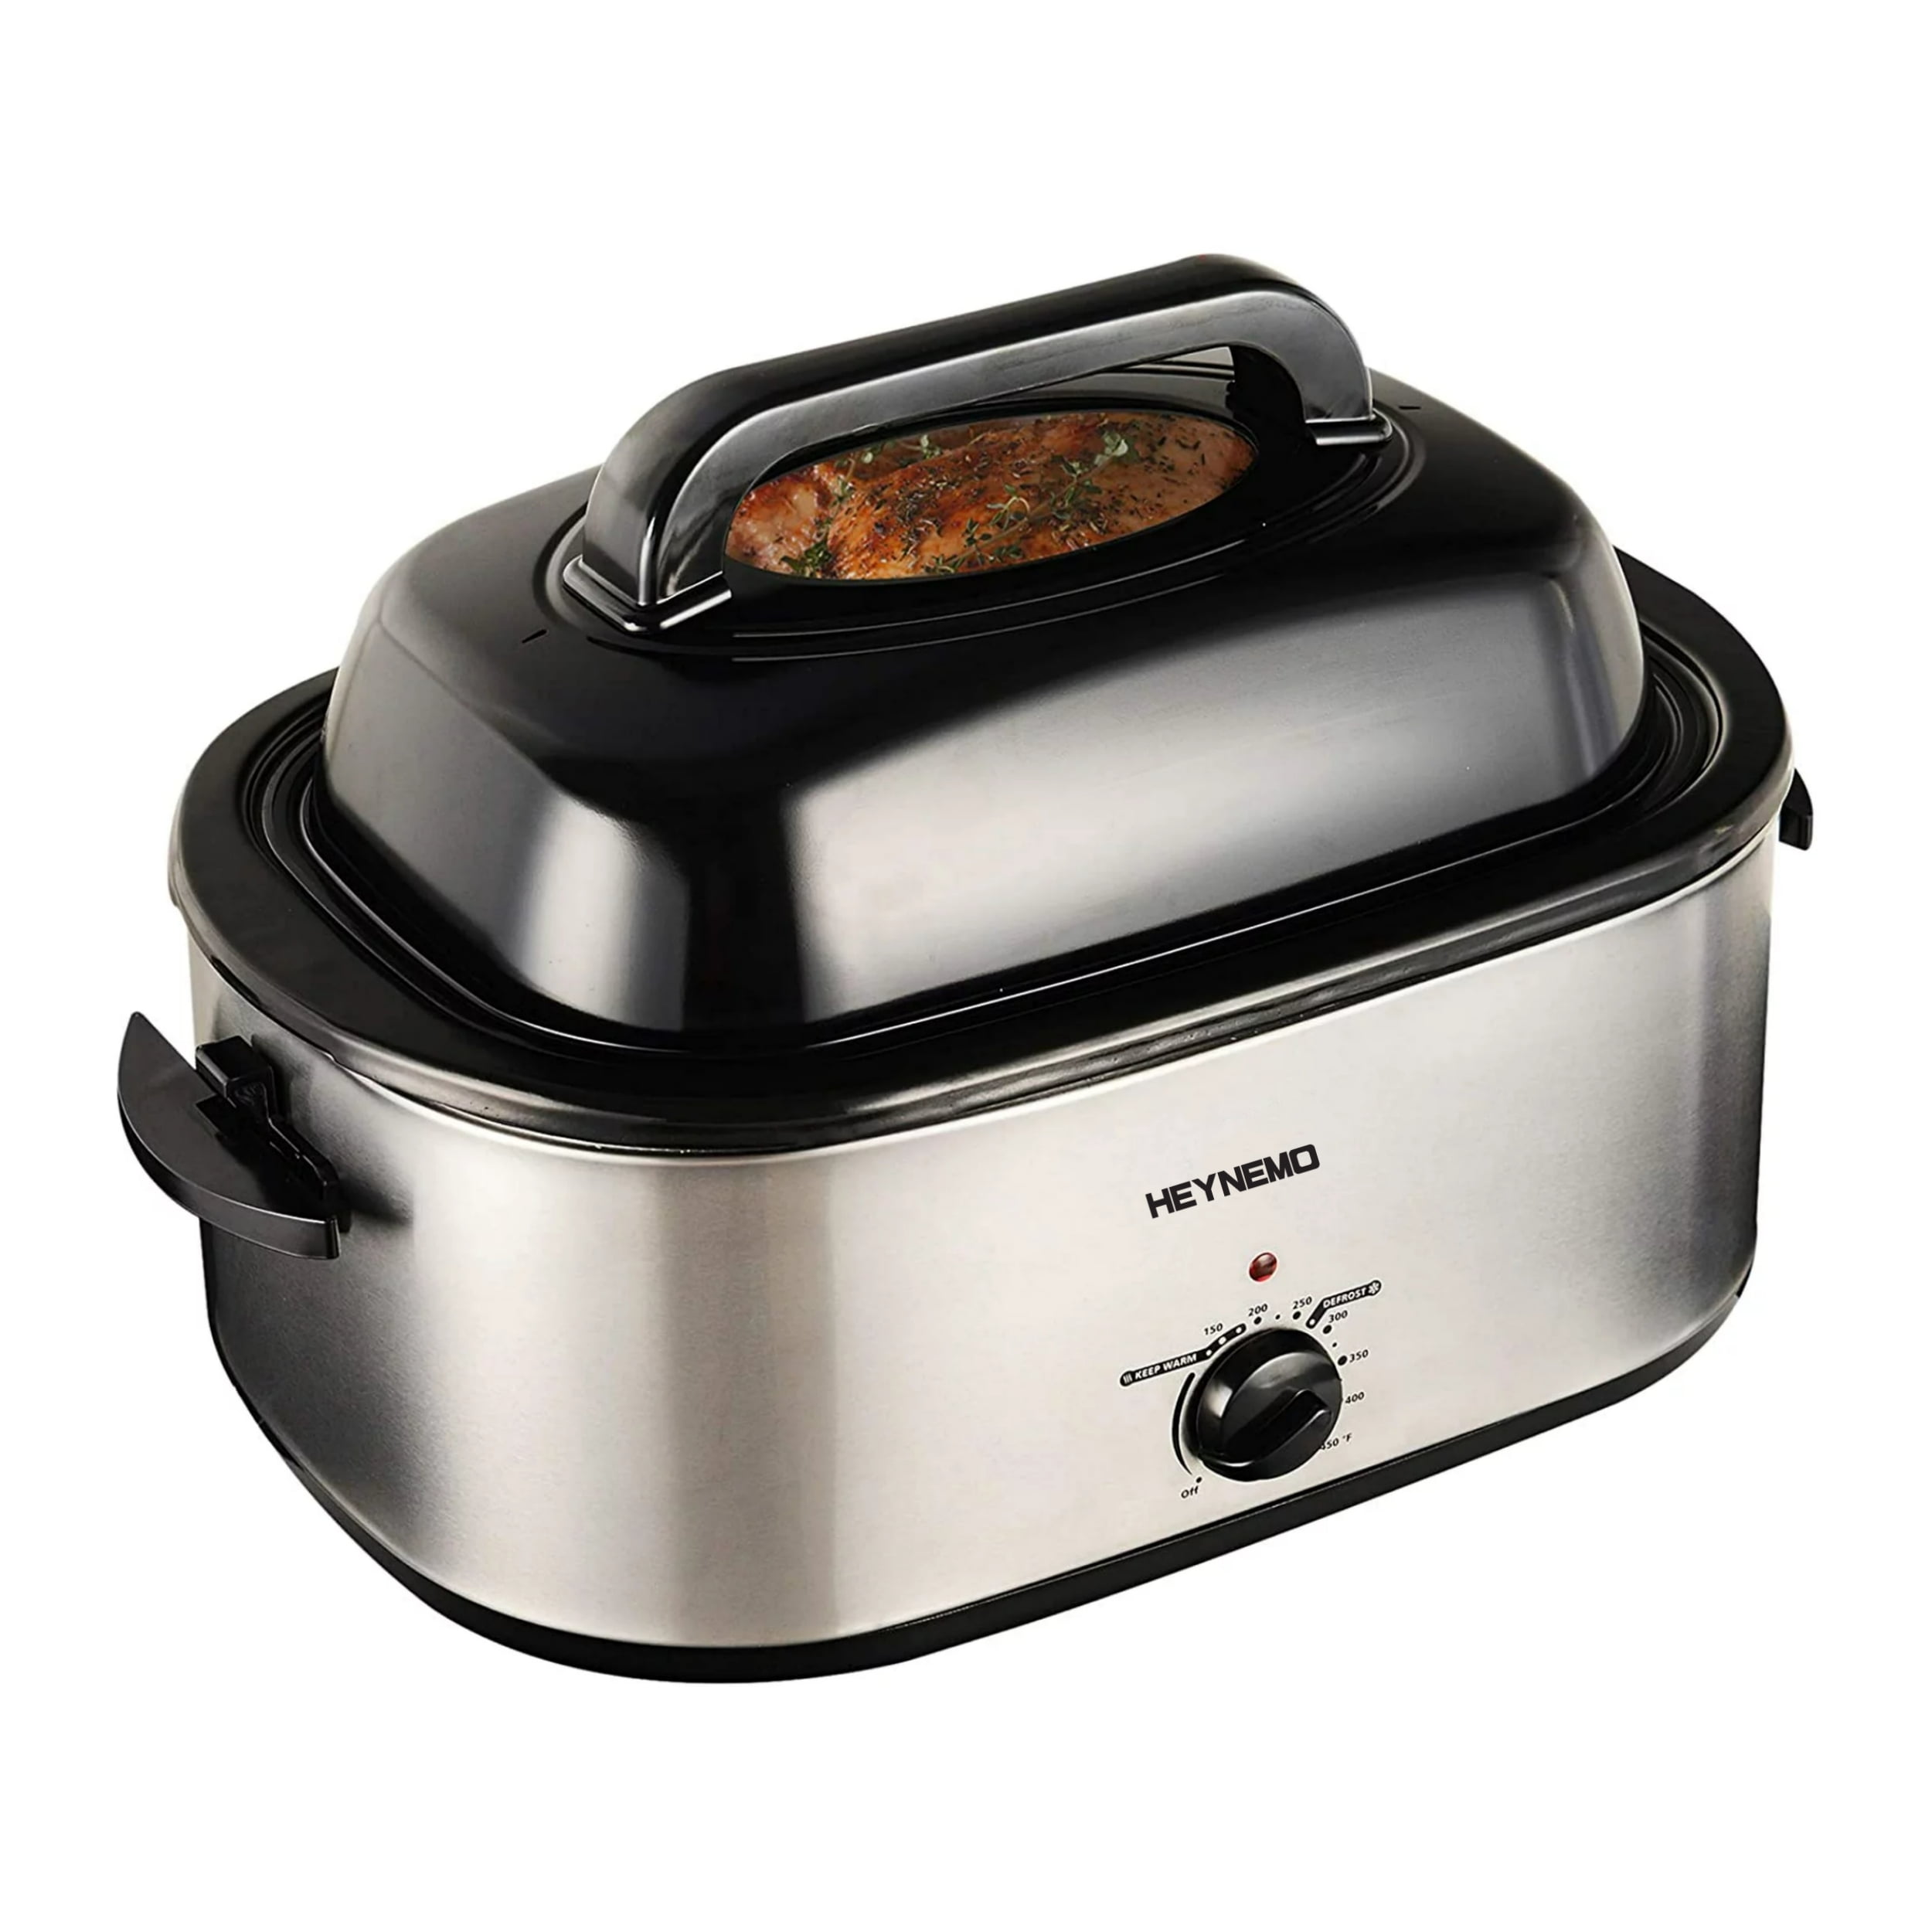 Hamilton Beach 9-in-1 Multicooker, 6 Quart Capacity, Slow Cooker, Sauté,  Sear, Steam, Rice, Nonstick, Stainless Steel, 33065 